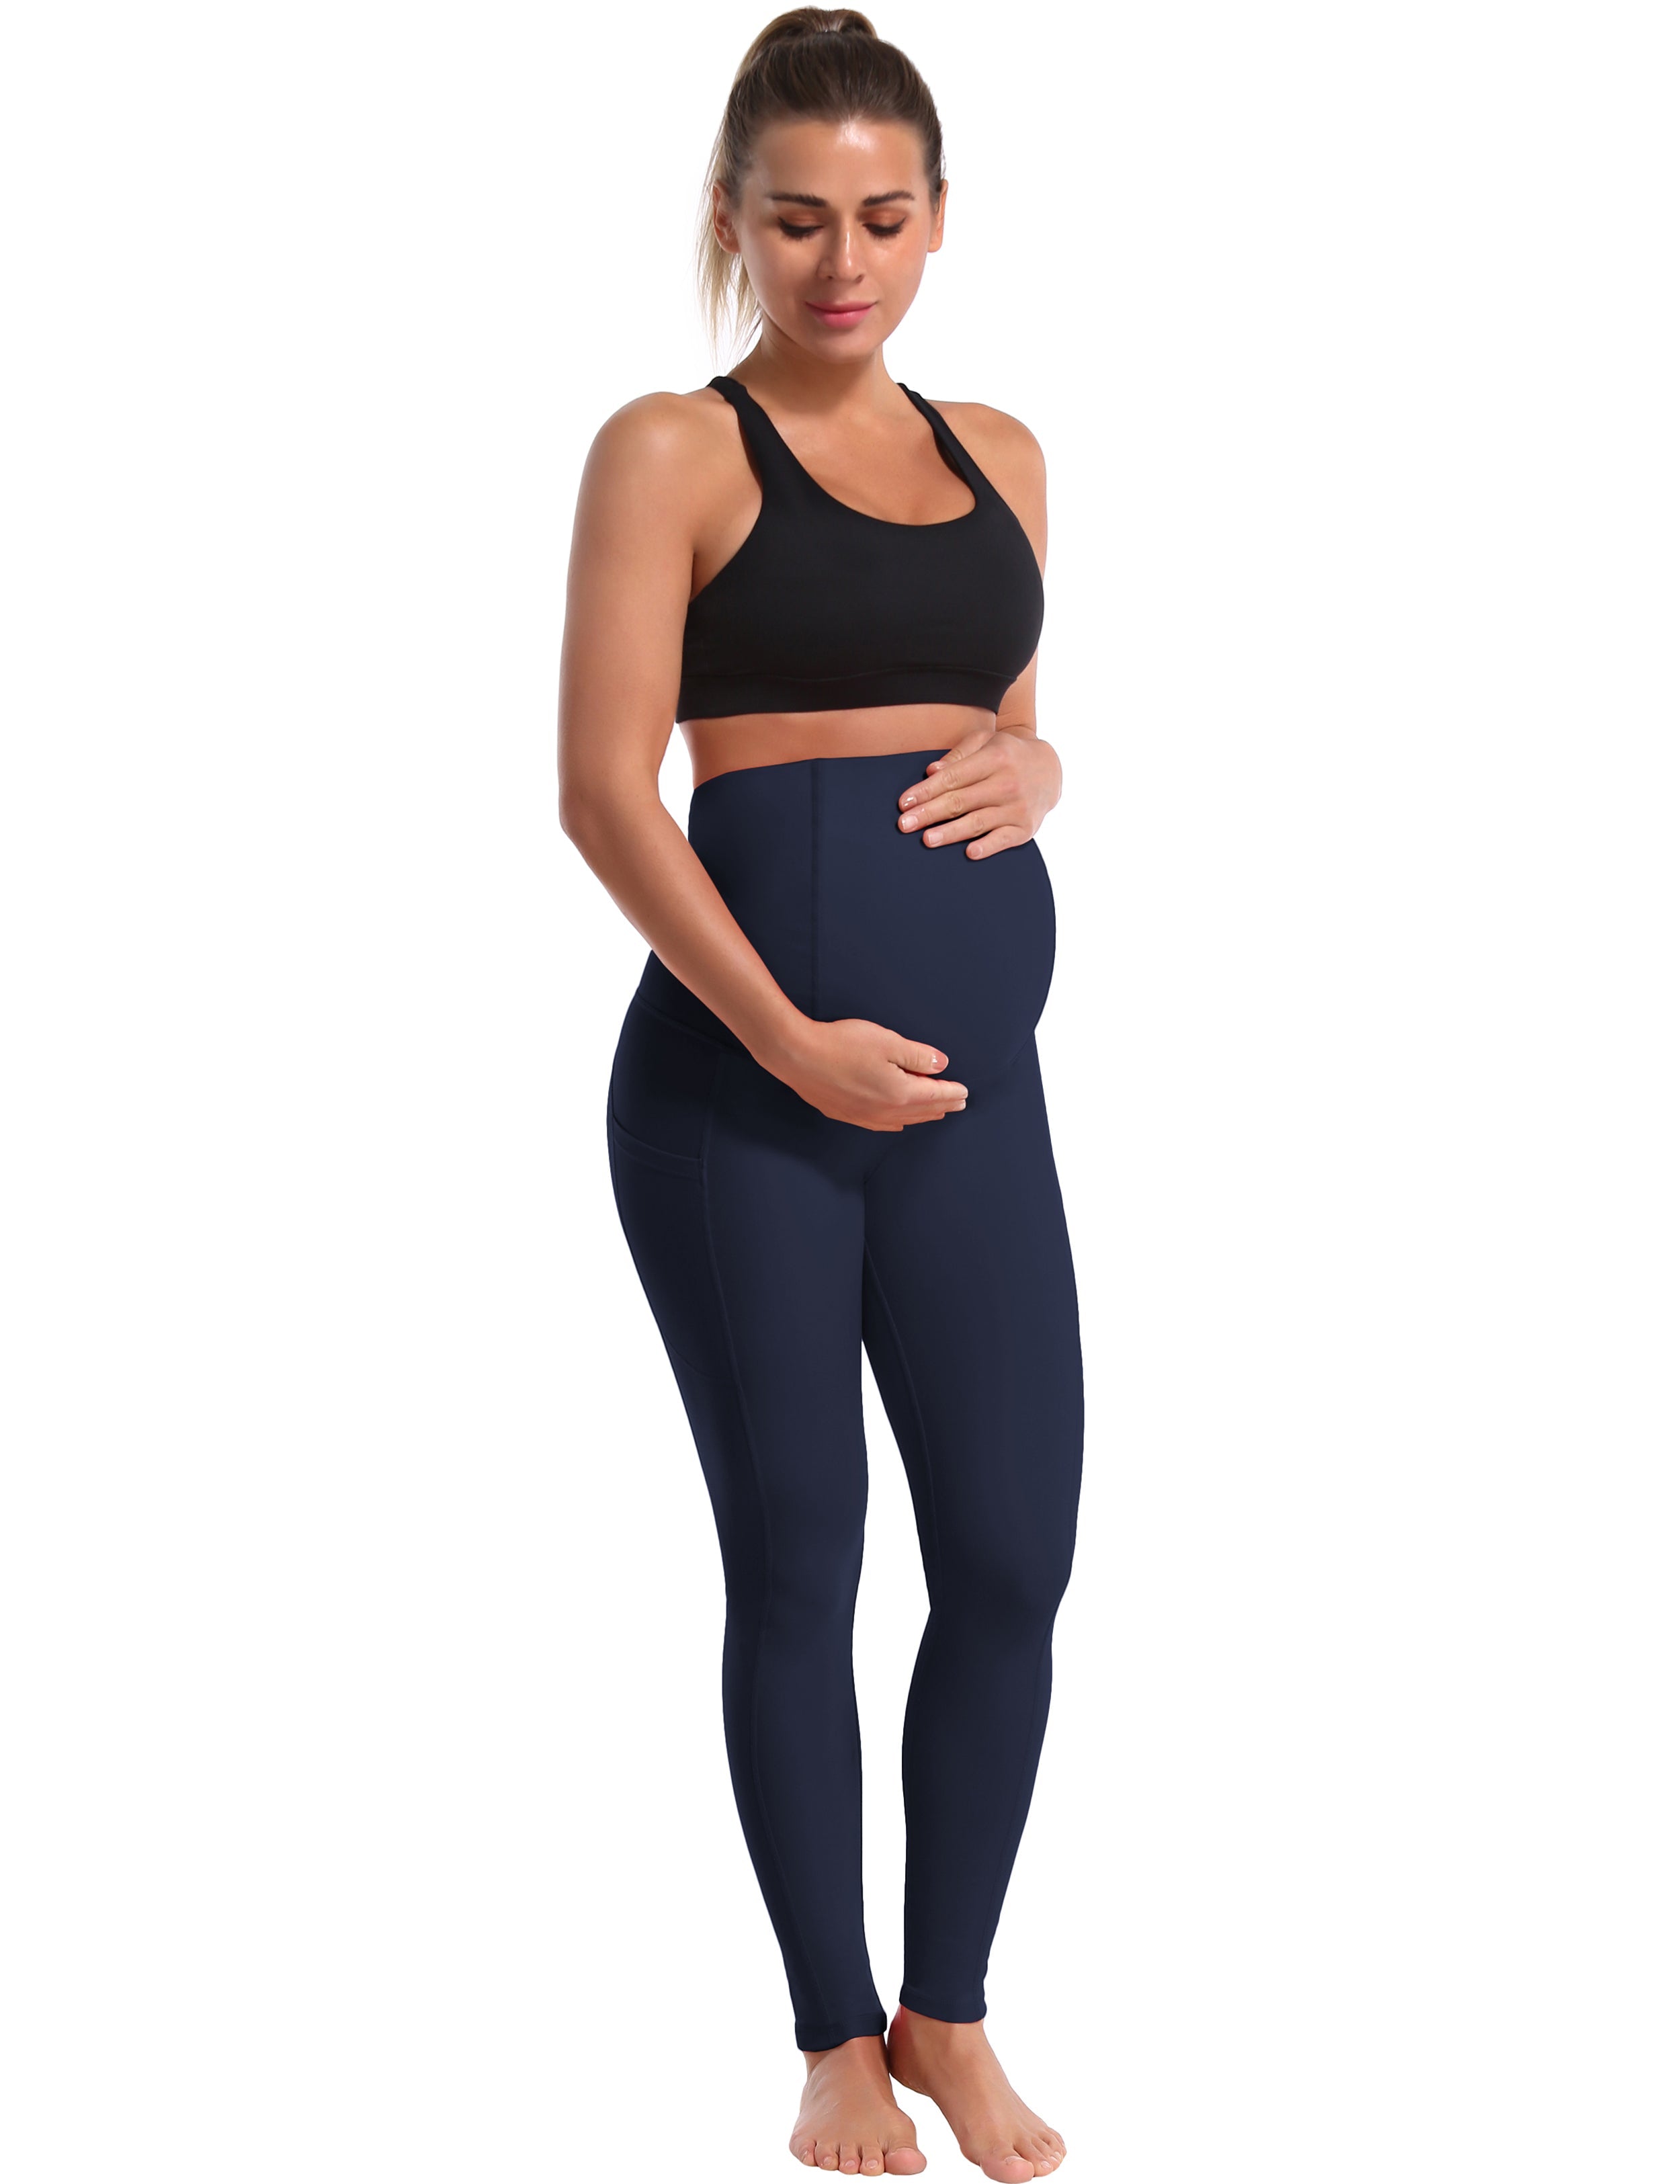 26" Side Pockets Maternity Tall Size Pants darknavy 87%Nylon/13%Spandex Softest-ever fabric High elasticity 4-way stretch Fabric doesn't attract lint easily No see-through Moisture-wicking Machine wash